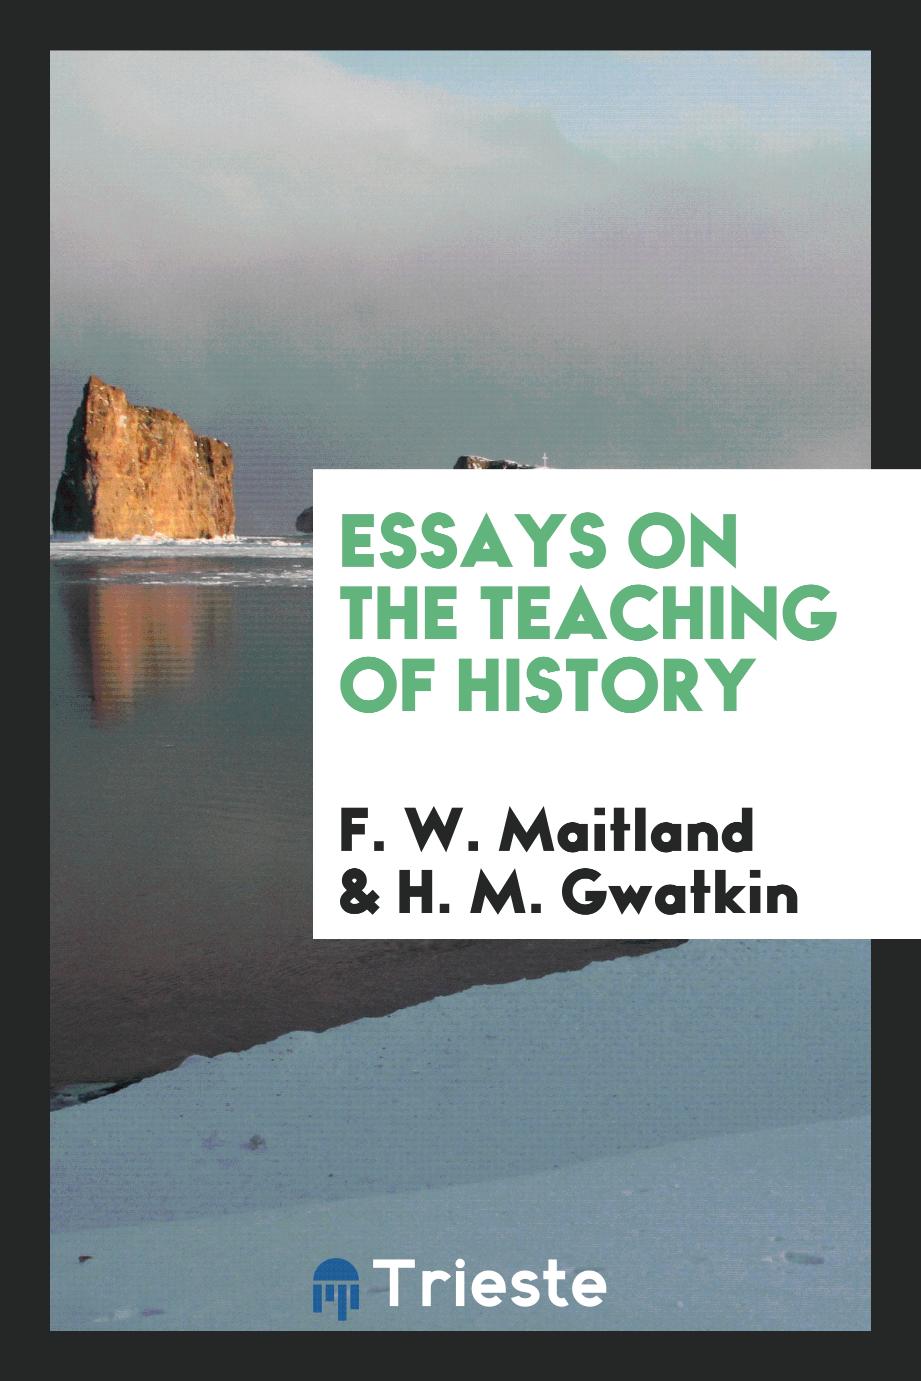 Essays on the teaching of history